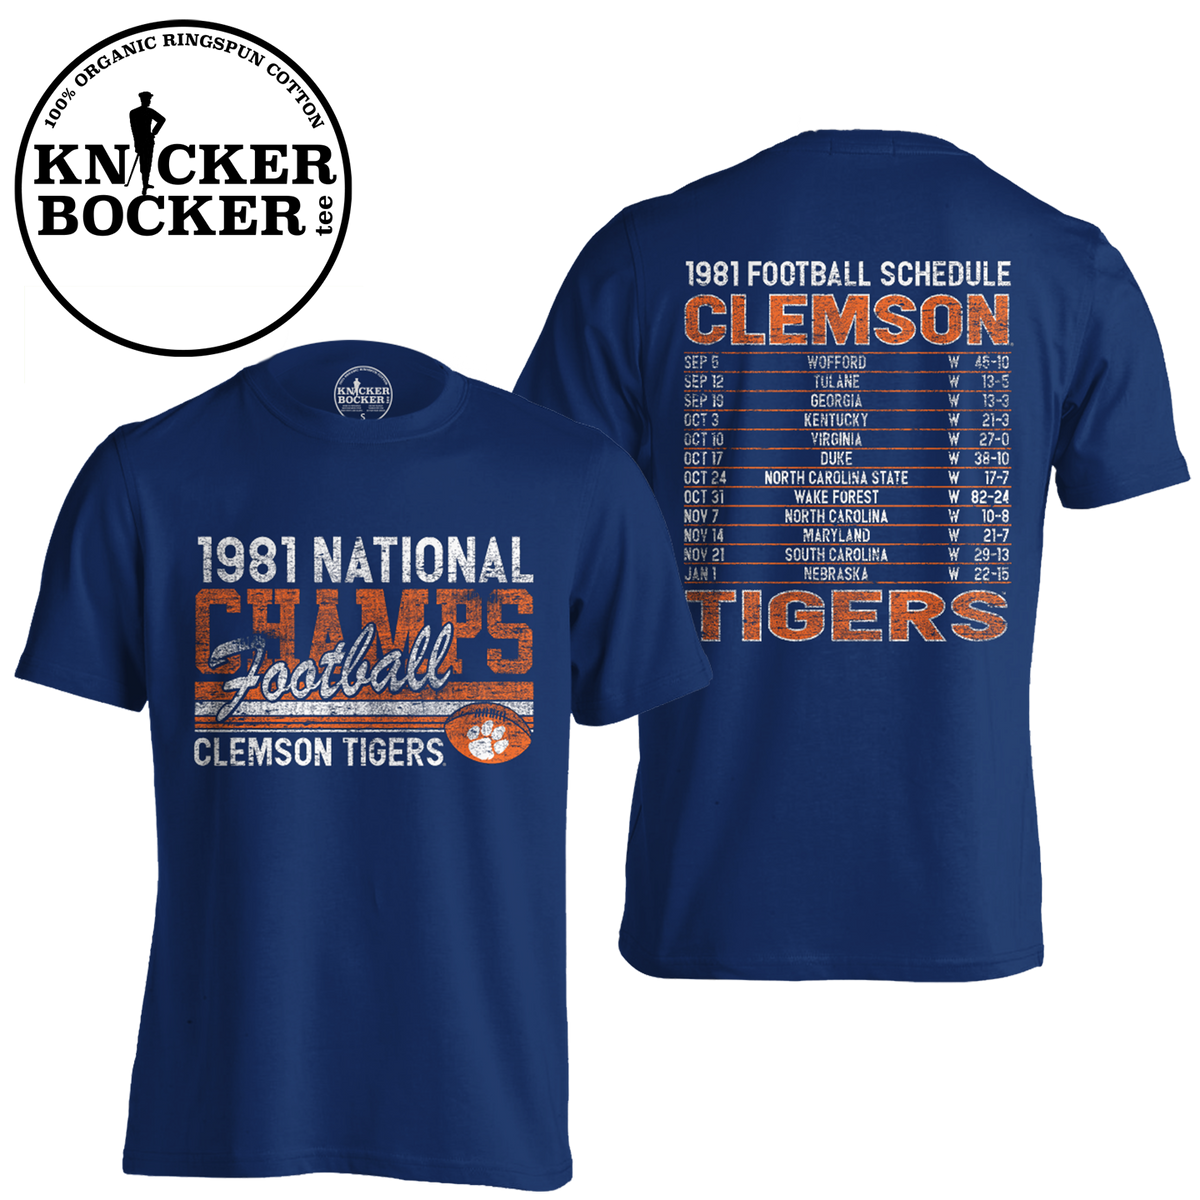 MRK 1981 National Champs Schedule Tee